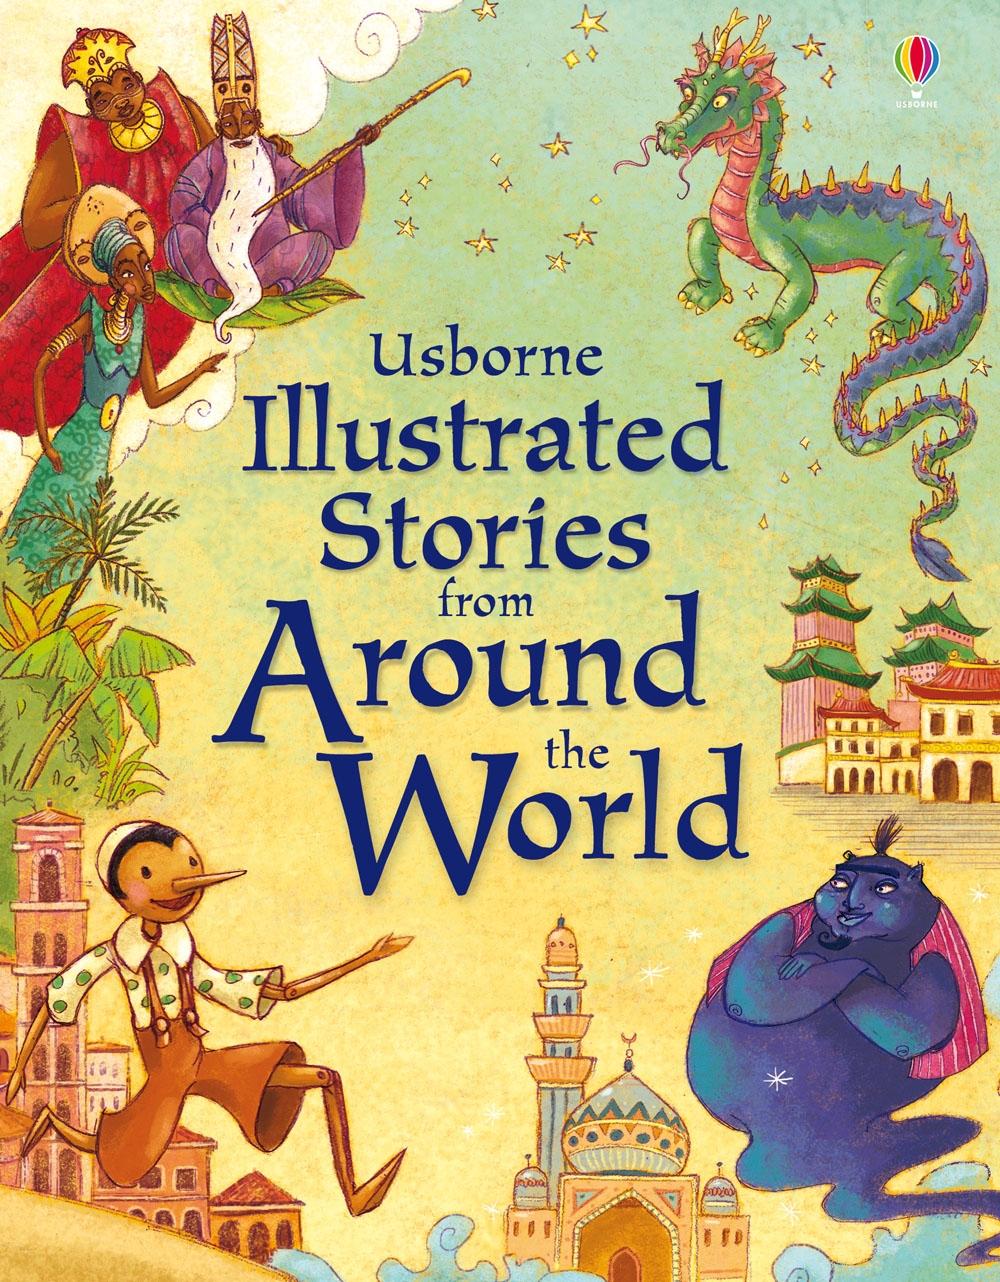 Illustrated Stories from Around the World / Lesley Sims / Buch / 336 S. / Englisch / 2010 / Usborne Publishing Ltd / EAN 9781409516491 - Sims, Lesley